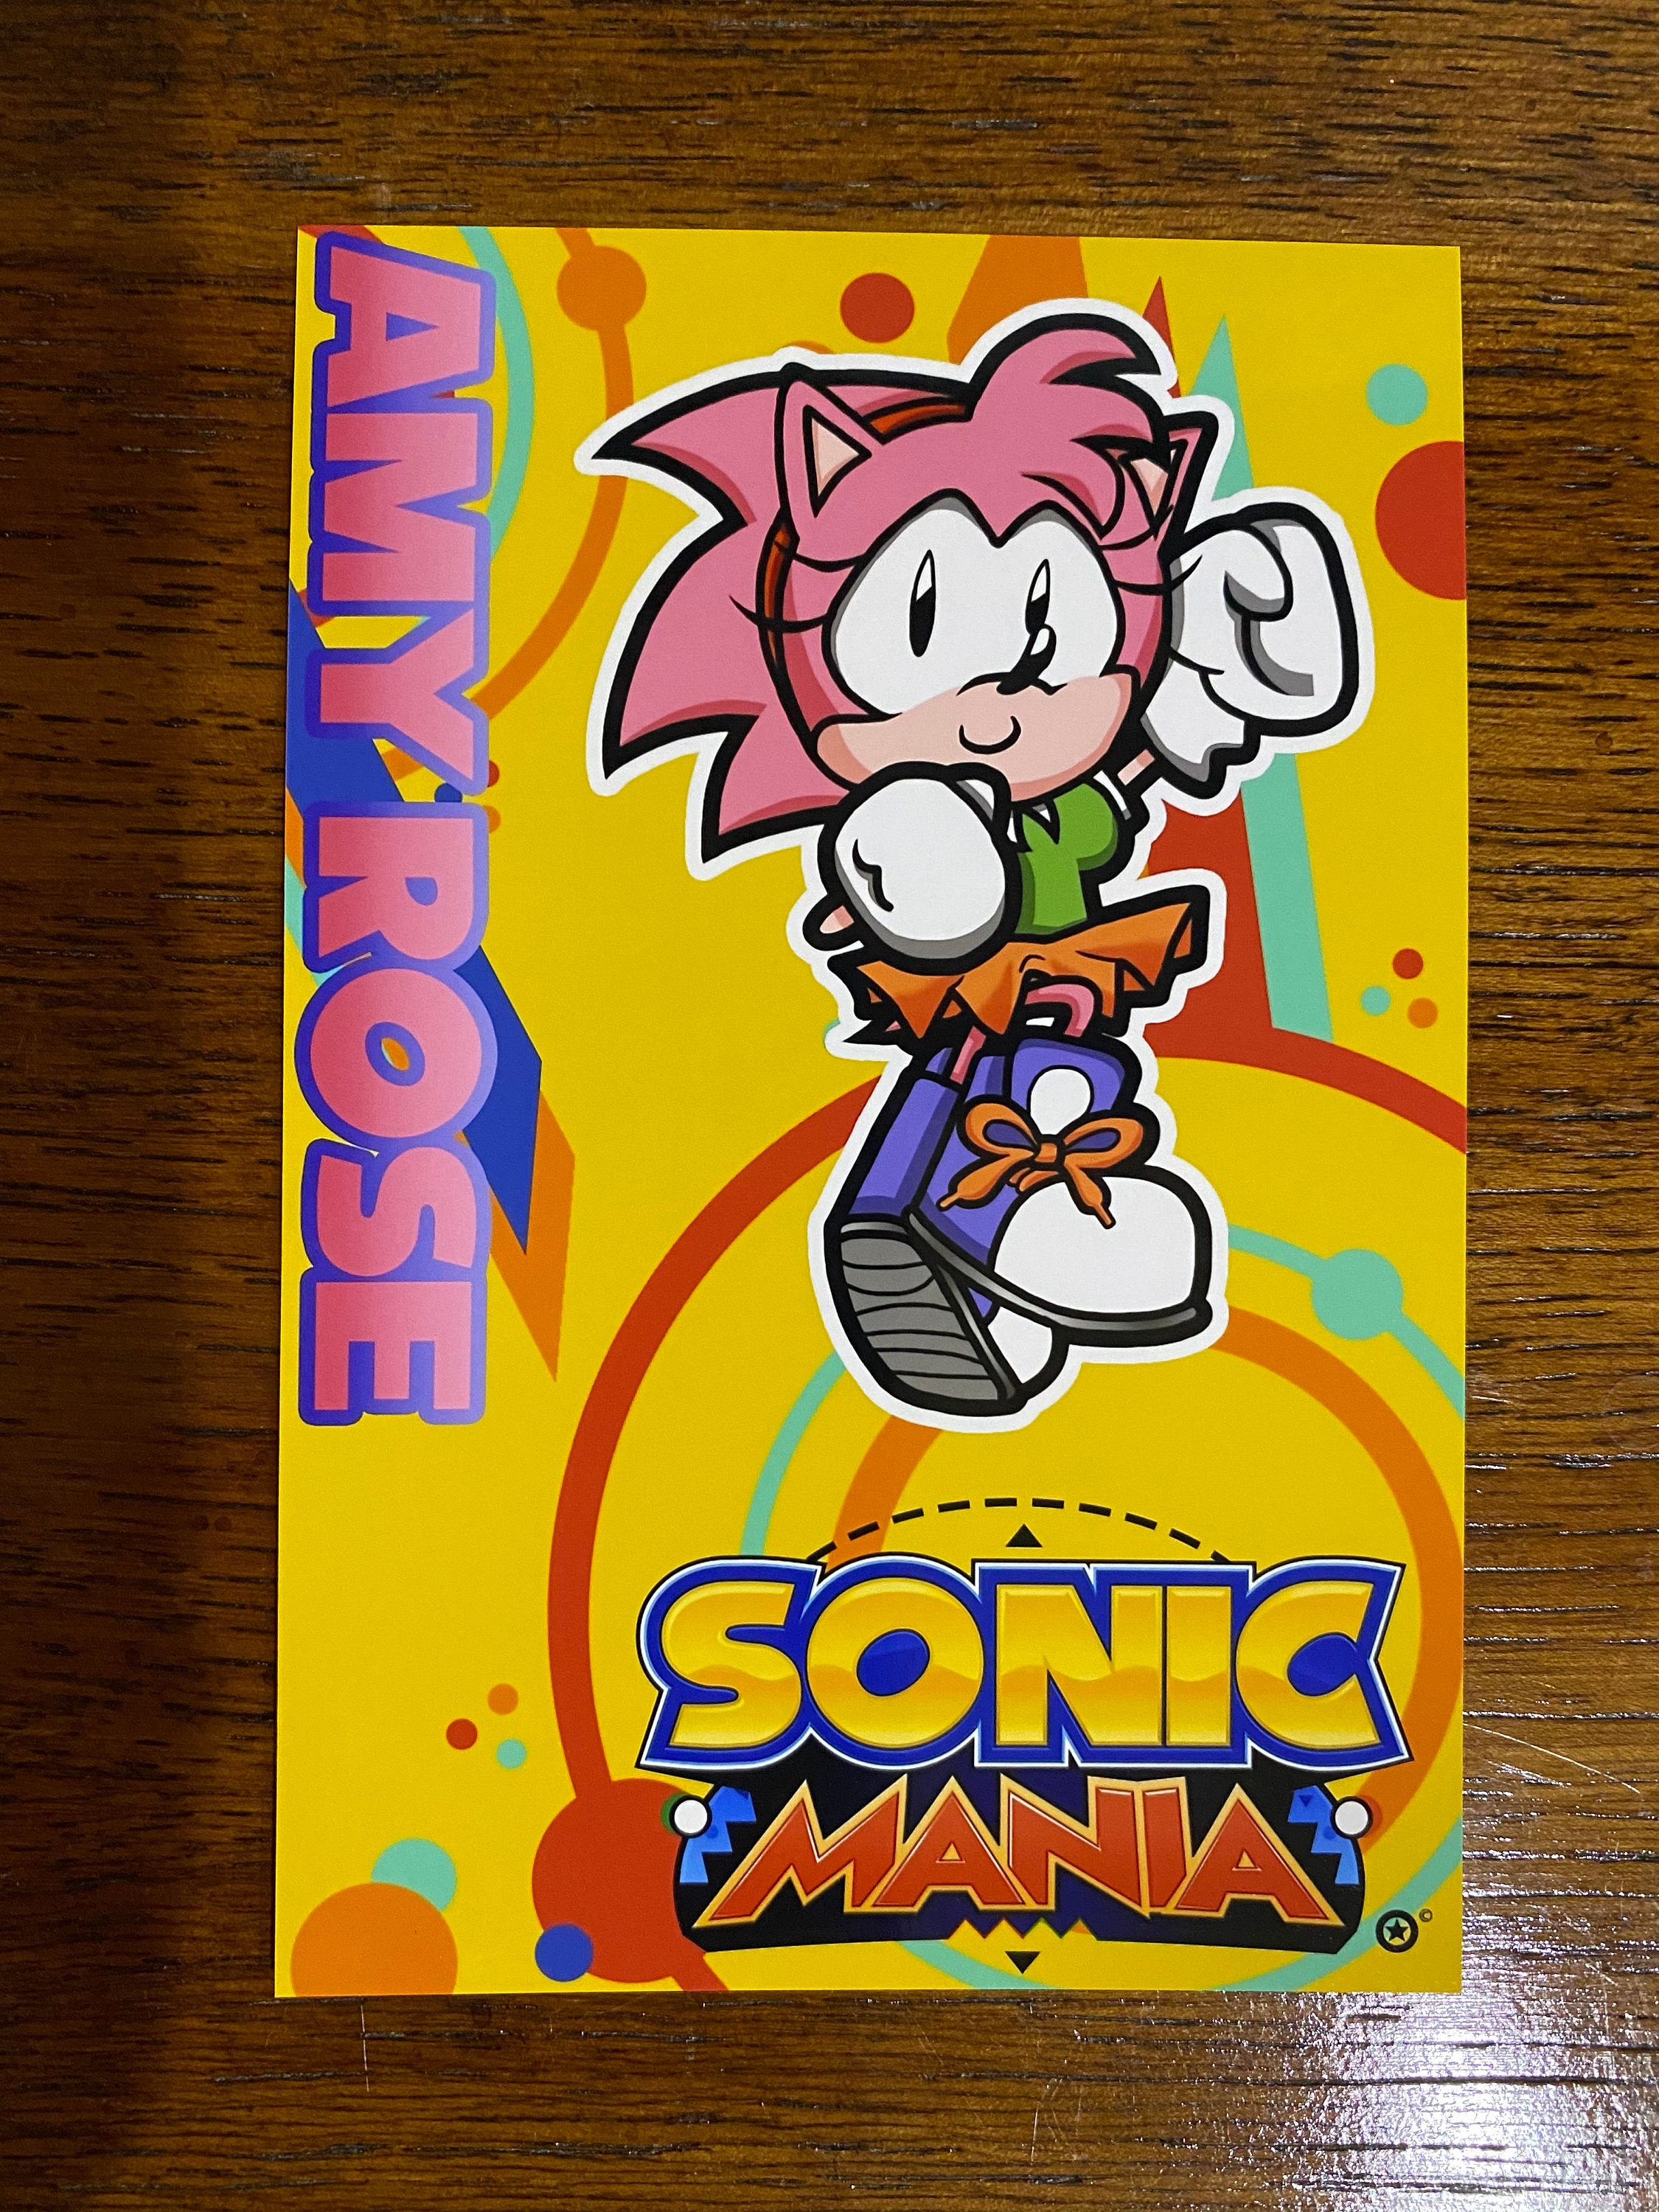 Sonic Mania Plus 4x6 Inch Glossy Prints Stylized Characters -  Sweden